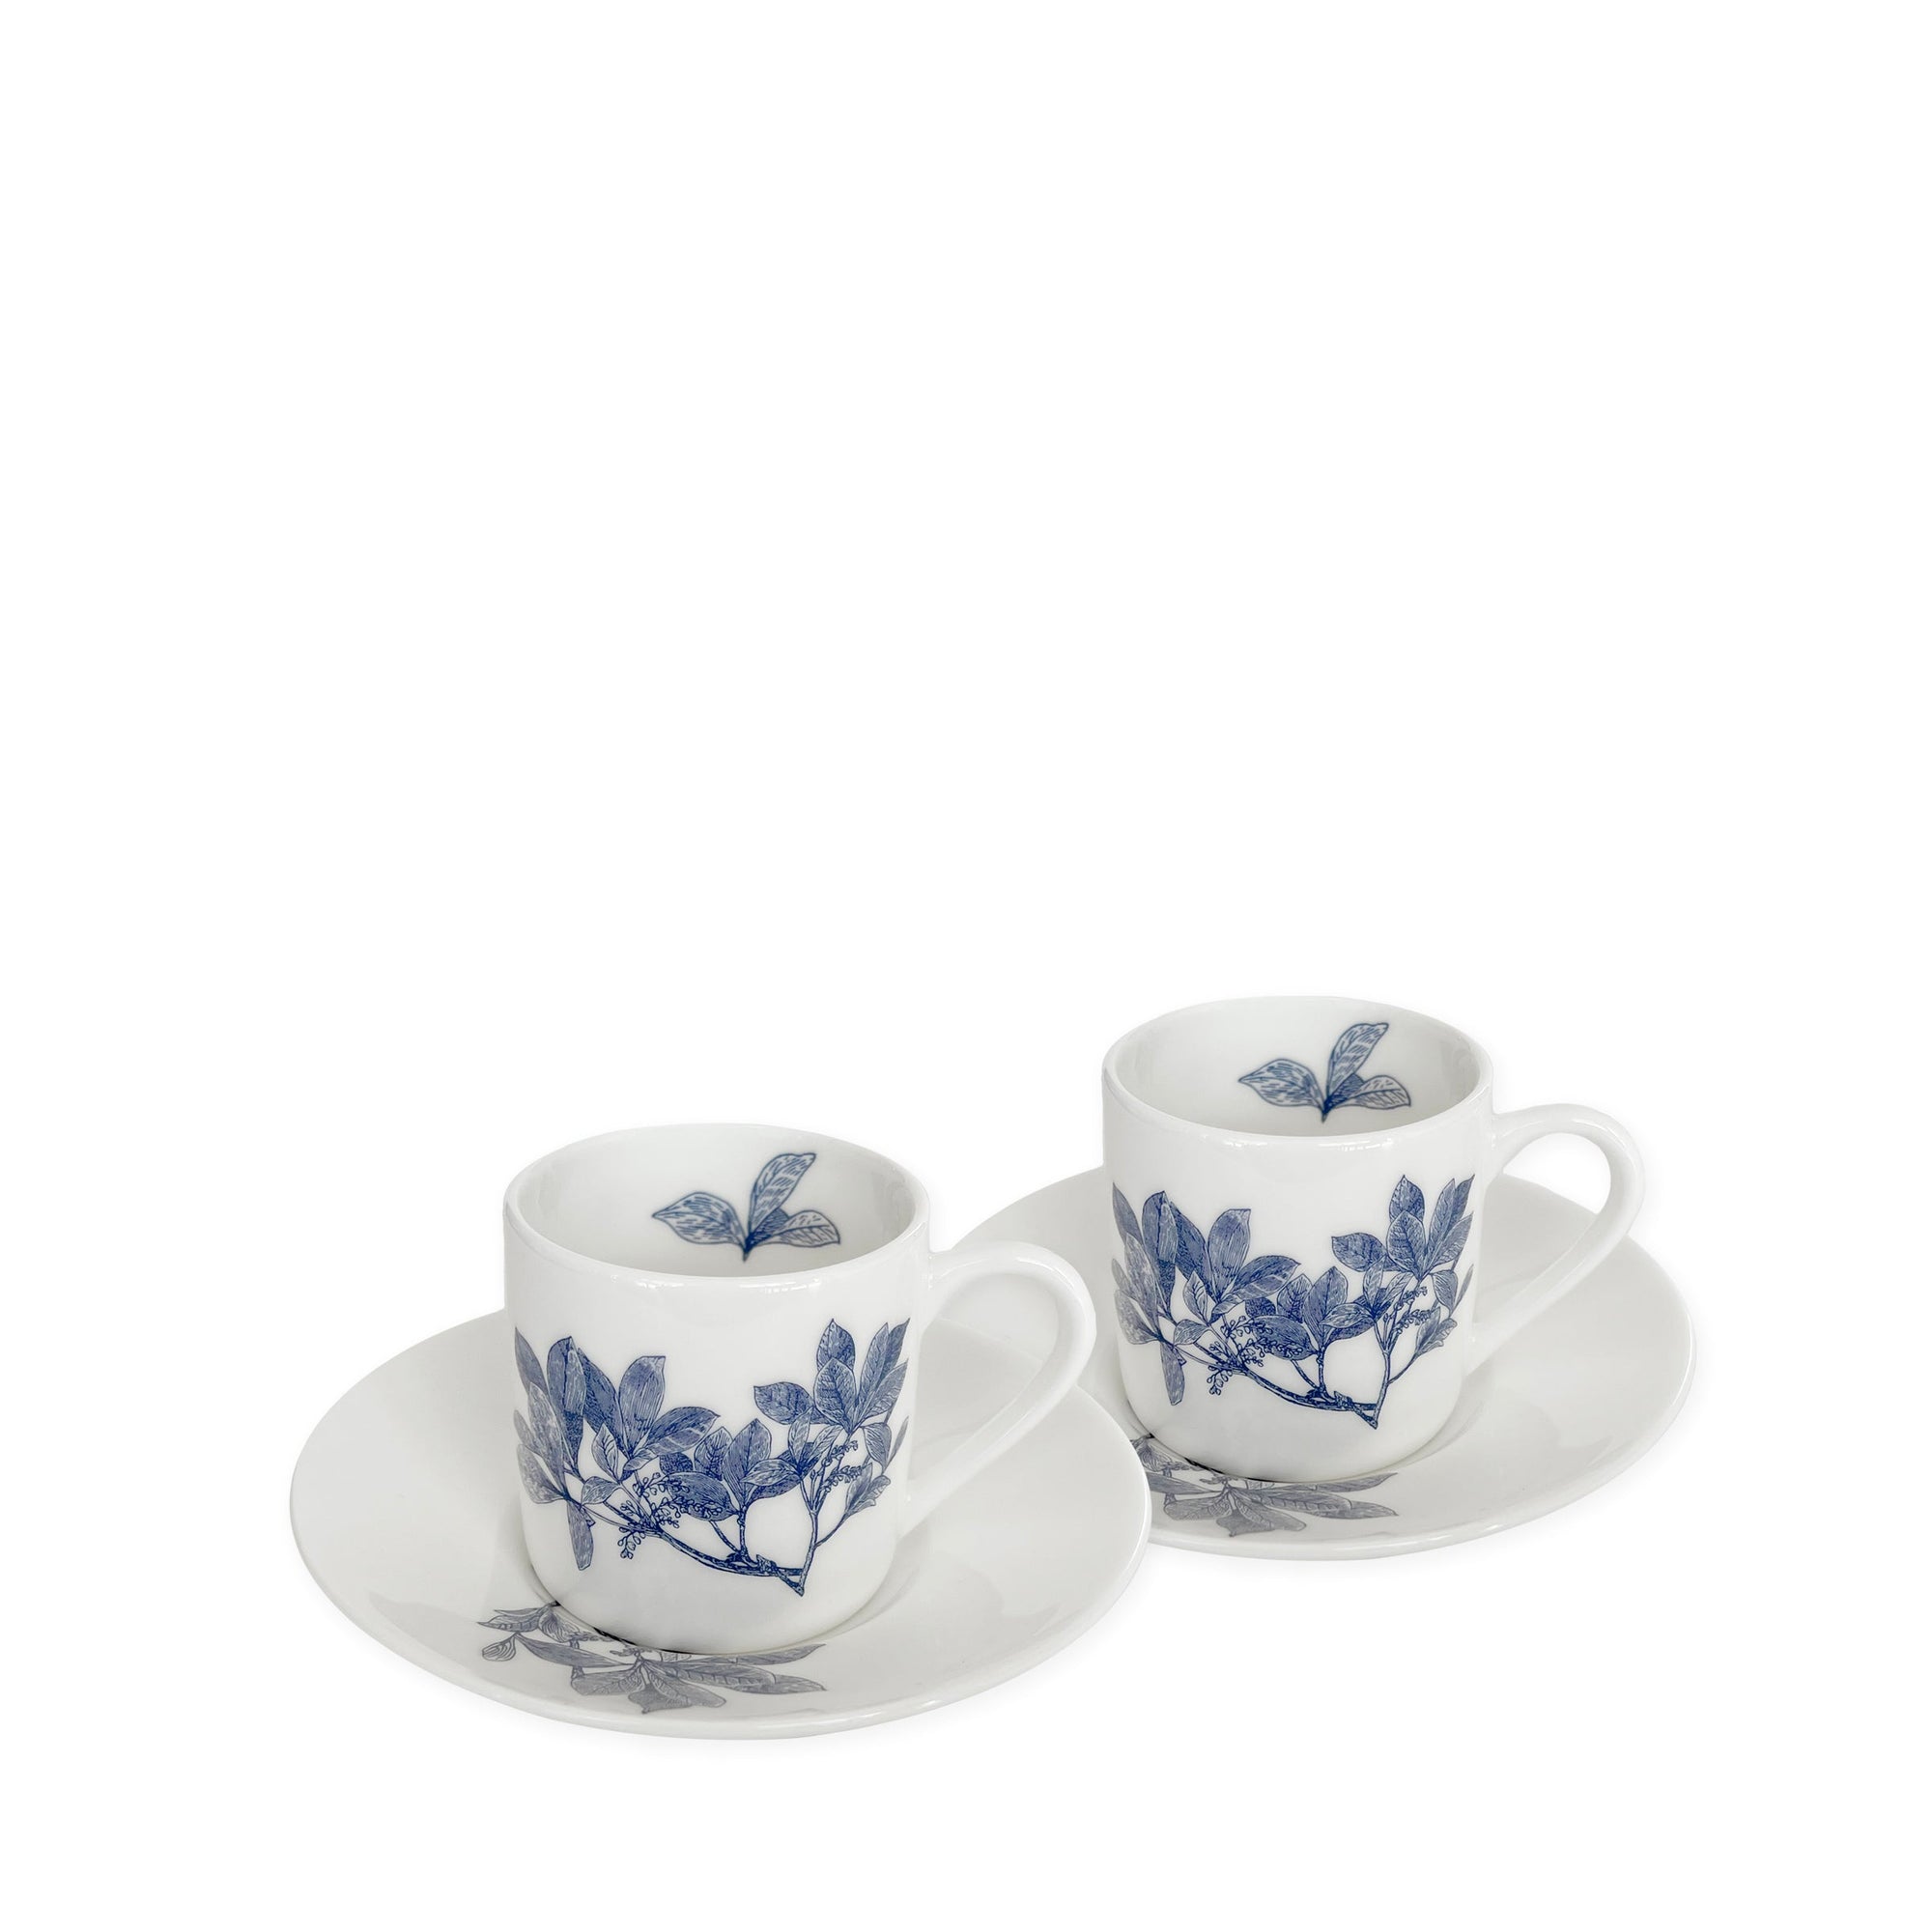 Two white ceramic cups with matching saucers, each adorned with blue floral designs, are perfect additions to any Blue and White Dinnerware collection. The Arbor Espresso Cups & Saucers, Set of 2 by Caskata are microwave-safe pieces that offer both beauty and practicality for everyday use.